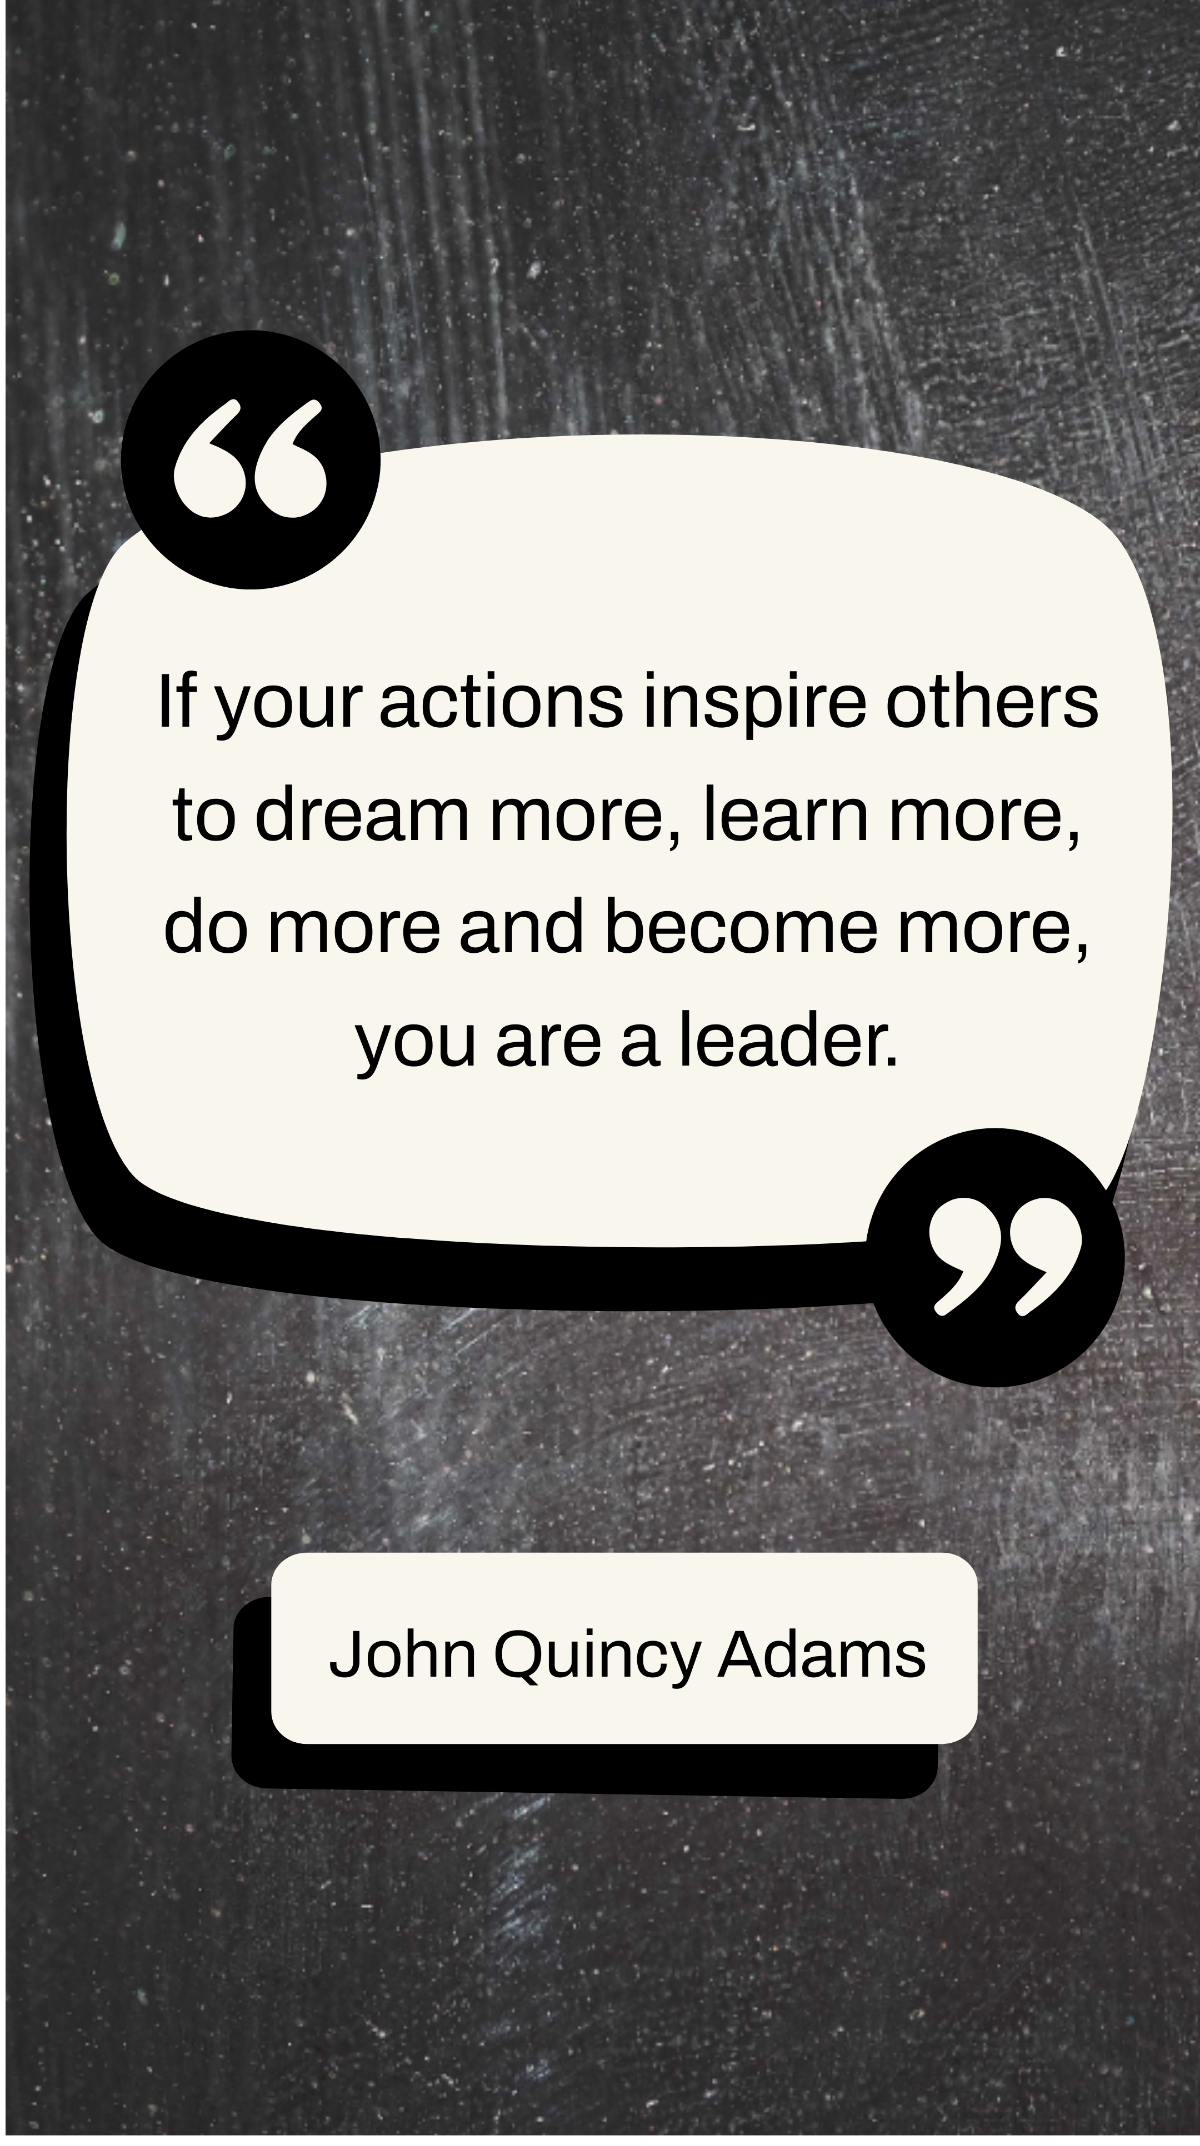 John Quincy Adams - “If your actions inspire others to dream more, learn more, do more and become more, you are a leader.”